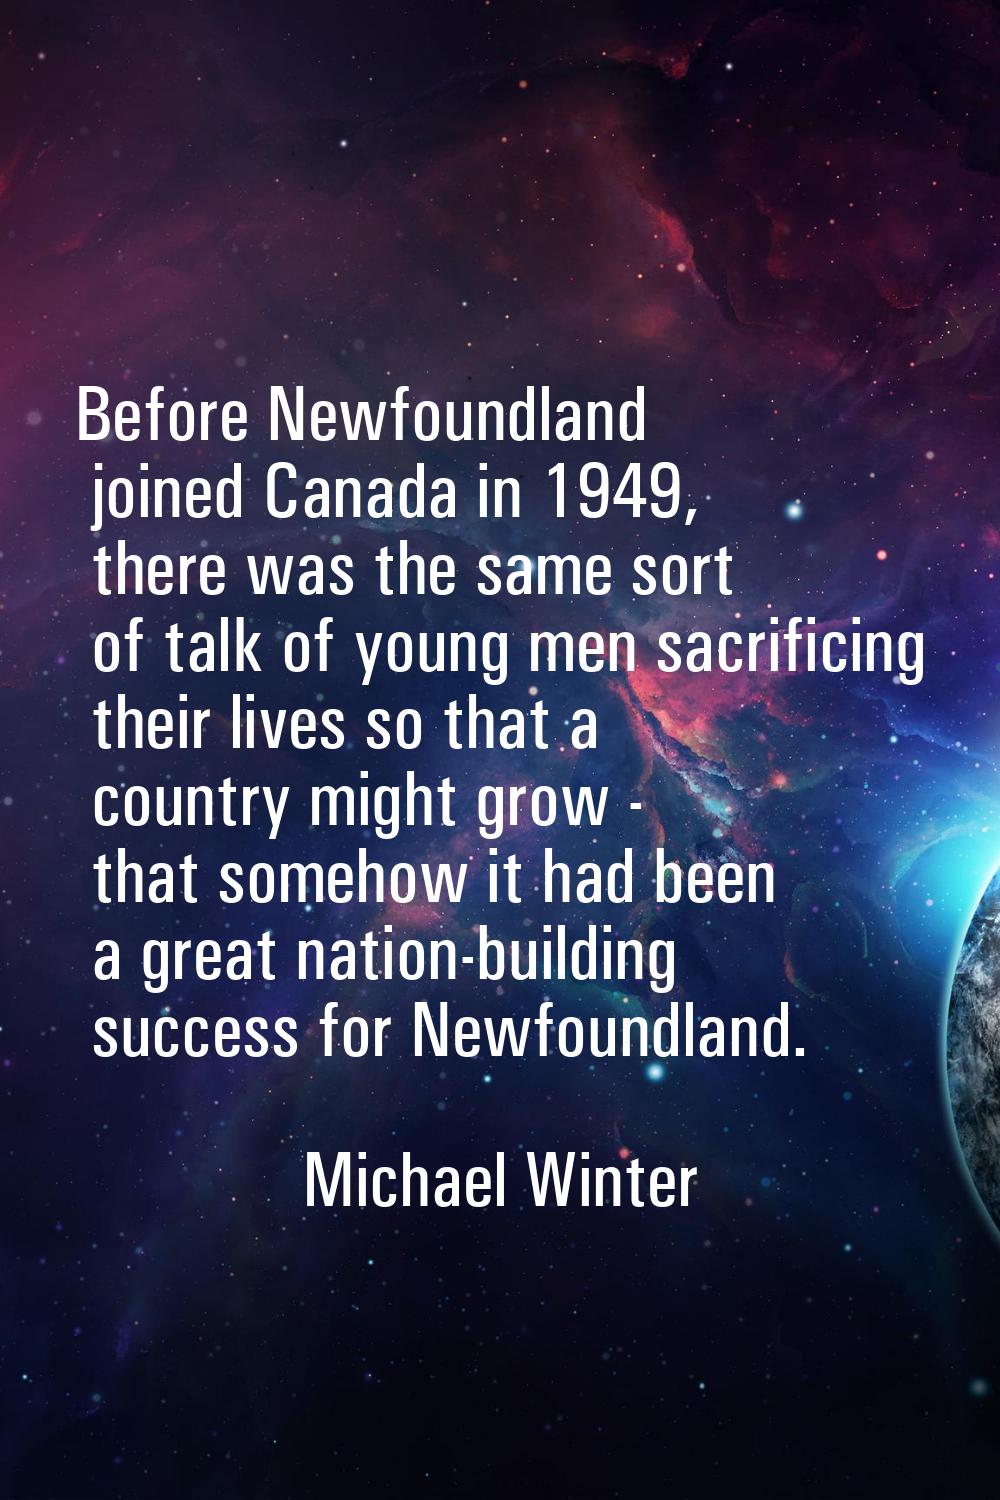 Before Newfoundland joined Canada in 1949, there was the same sort of talk of young men sacrificing